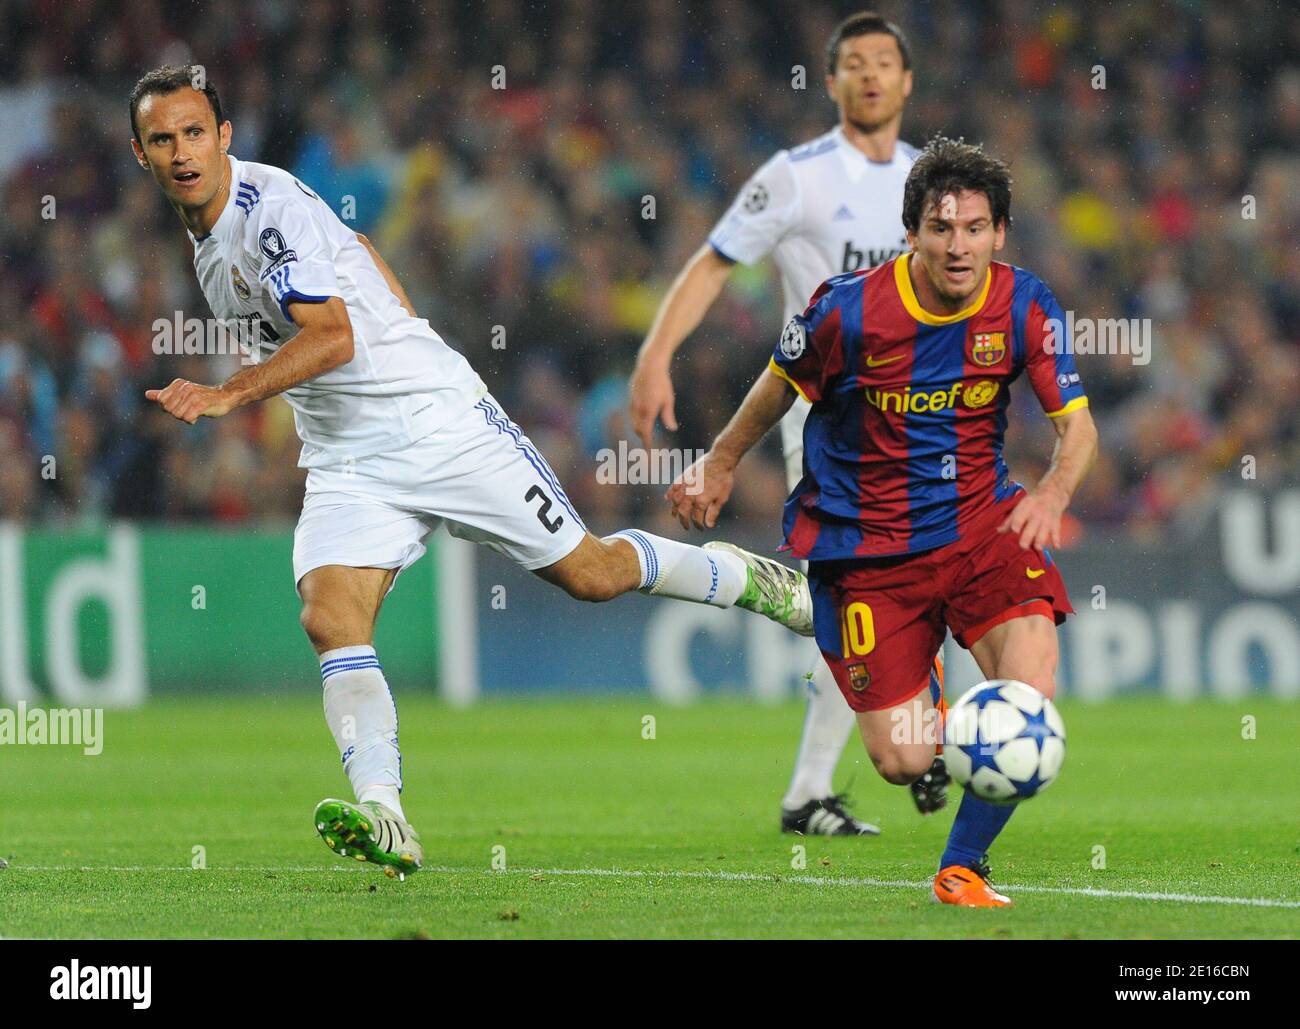 Barcelona's Lionel Messi challenges Real Madrid's Ricardo Carvalho during  the UEFA Champions League Semi Final, second leg soccer match, FC Barcelona  Vs Real Madrid at Nou Camp in Barcelona, Spain on May